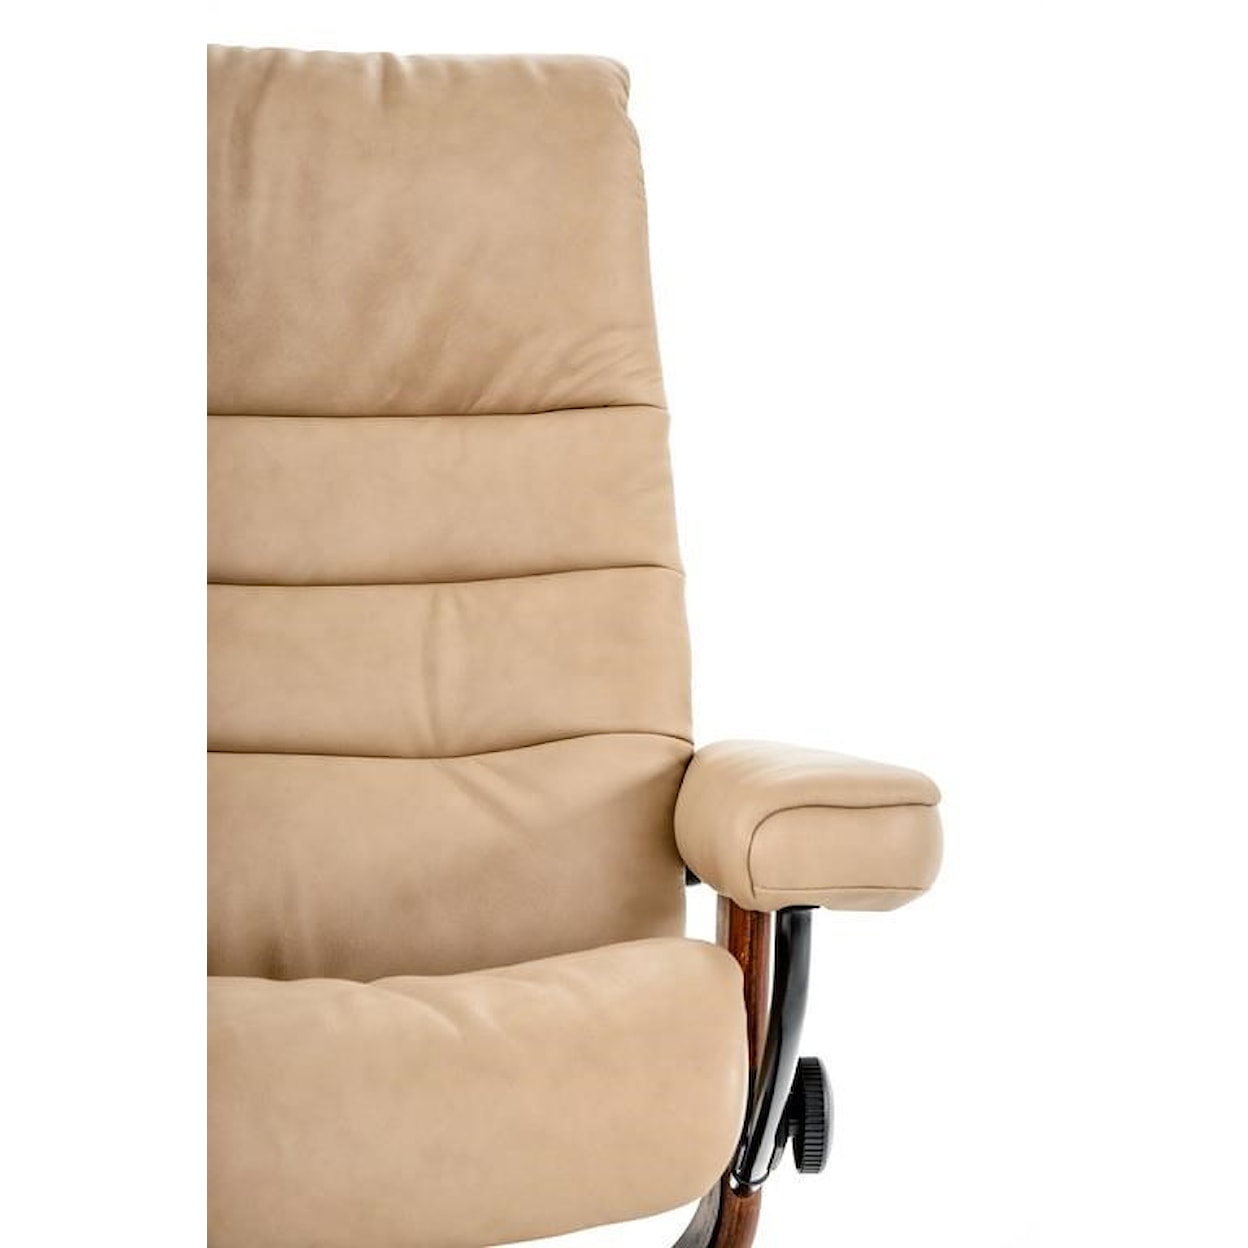 Stressless by Ekornes Stressless Recliners Large Opal Classic Chair